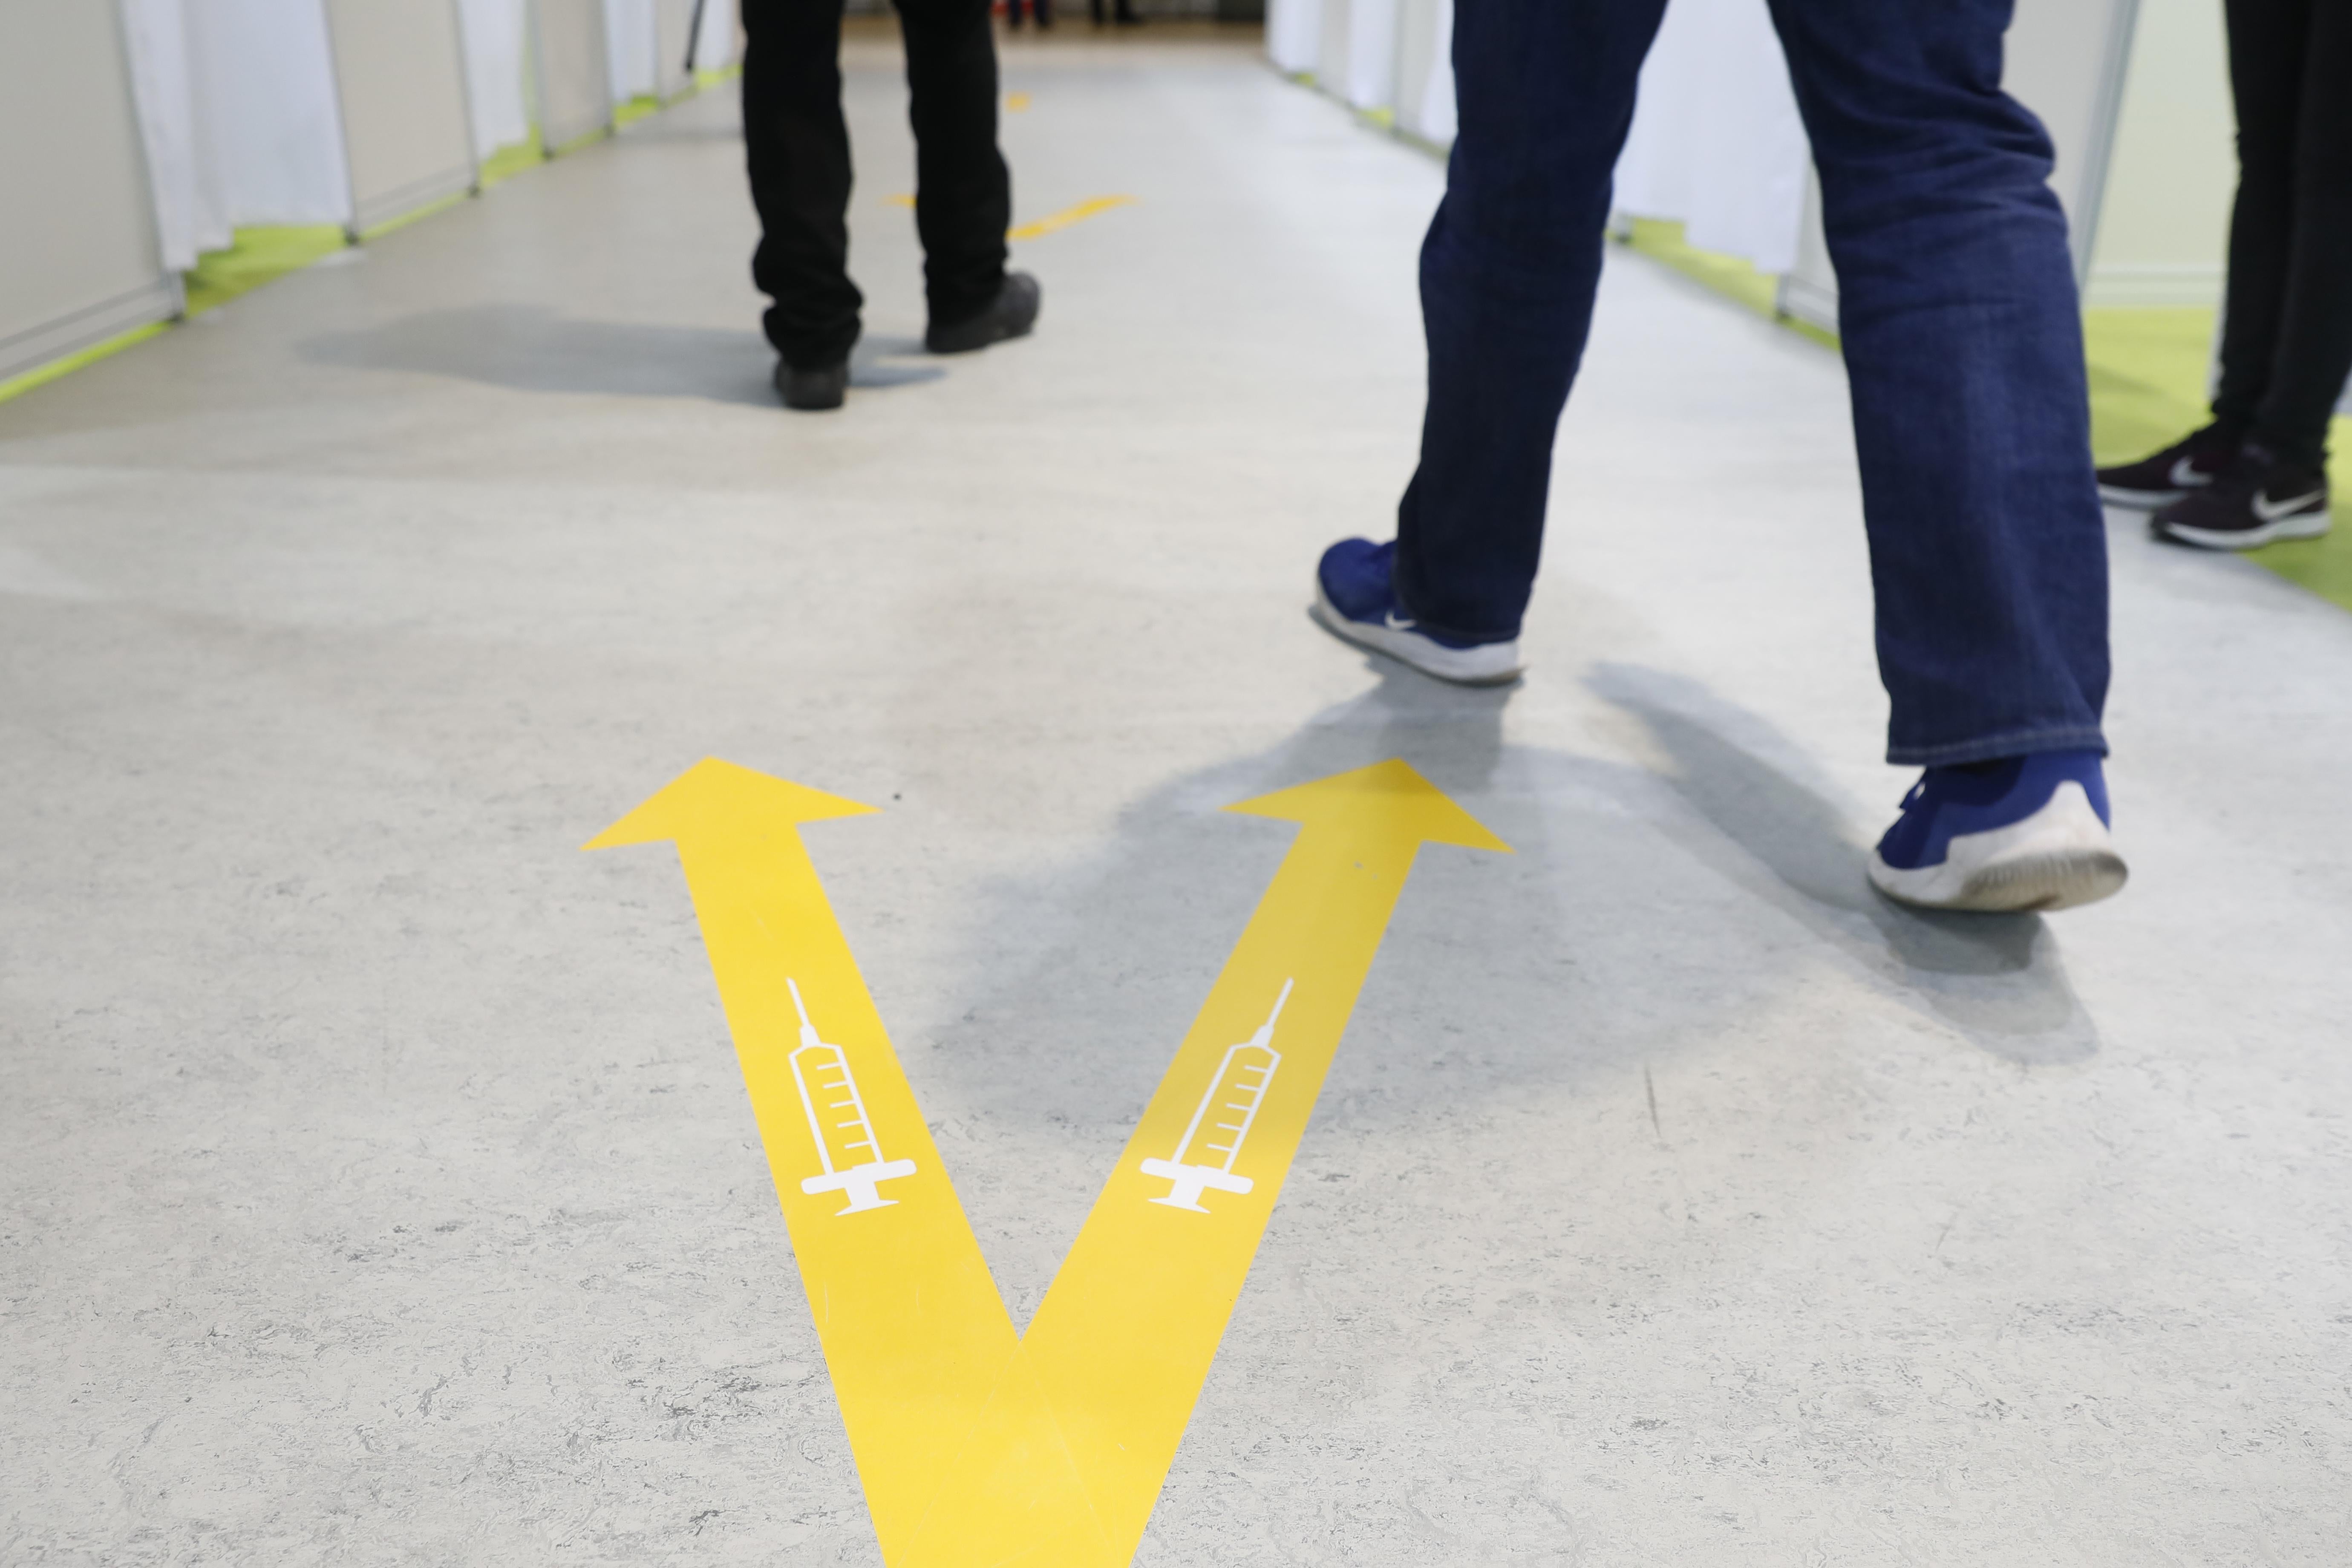 People's feet beside a yellow V painted on the floor, with a syringe in each arm of the V.